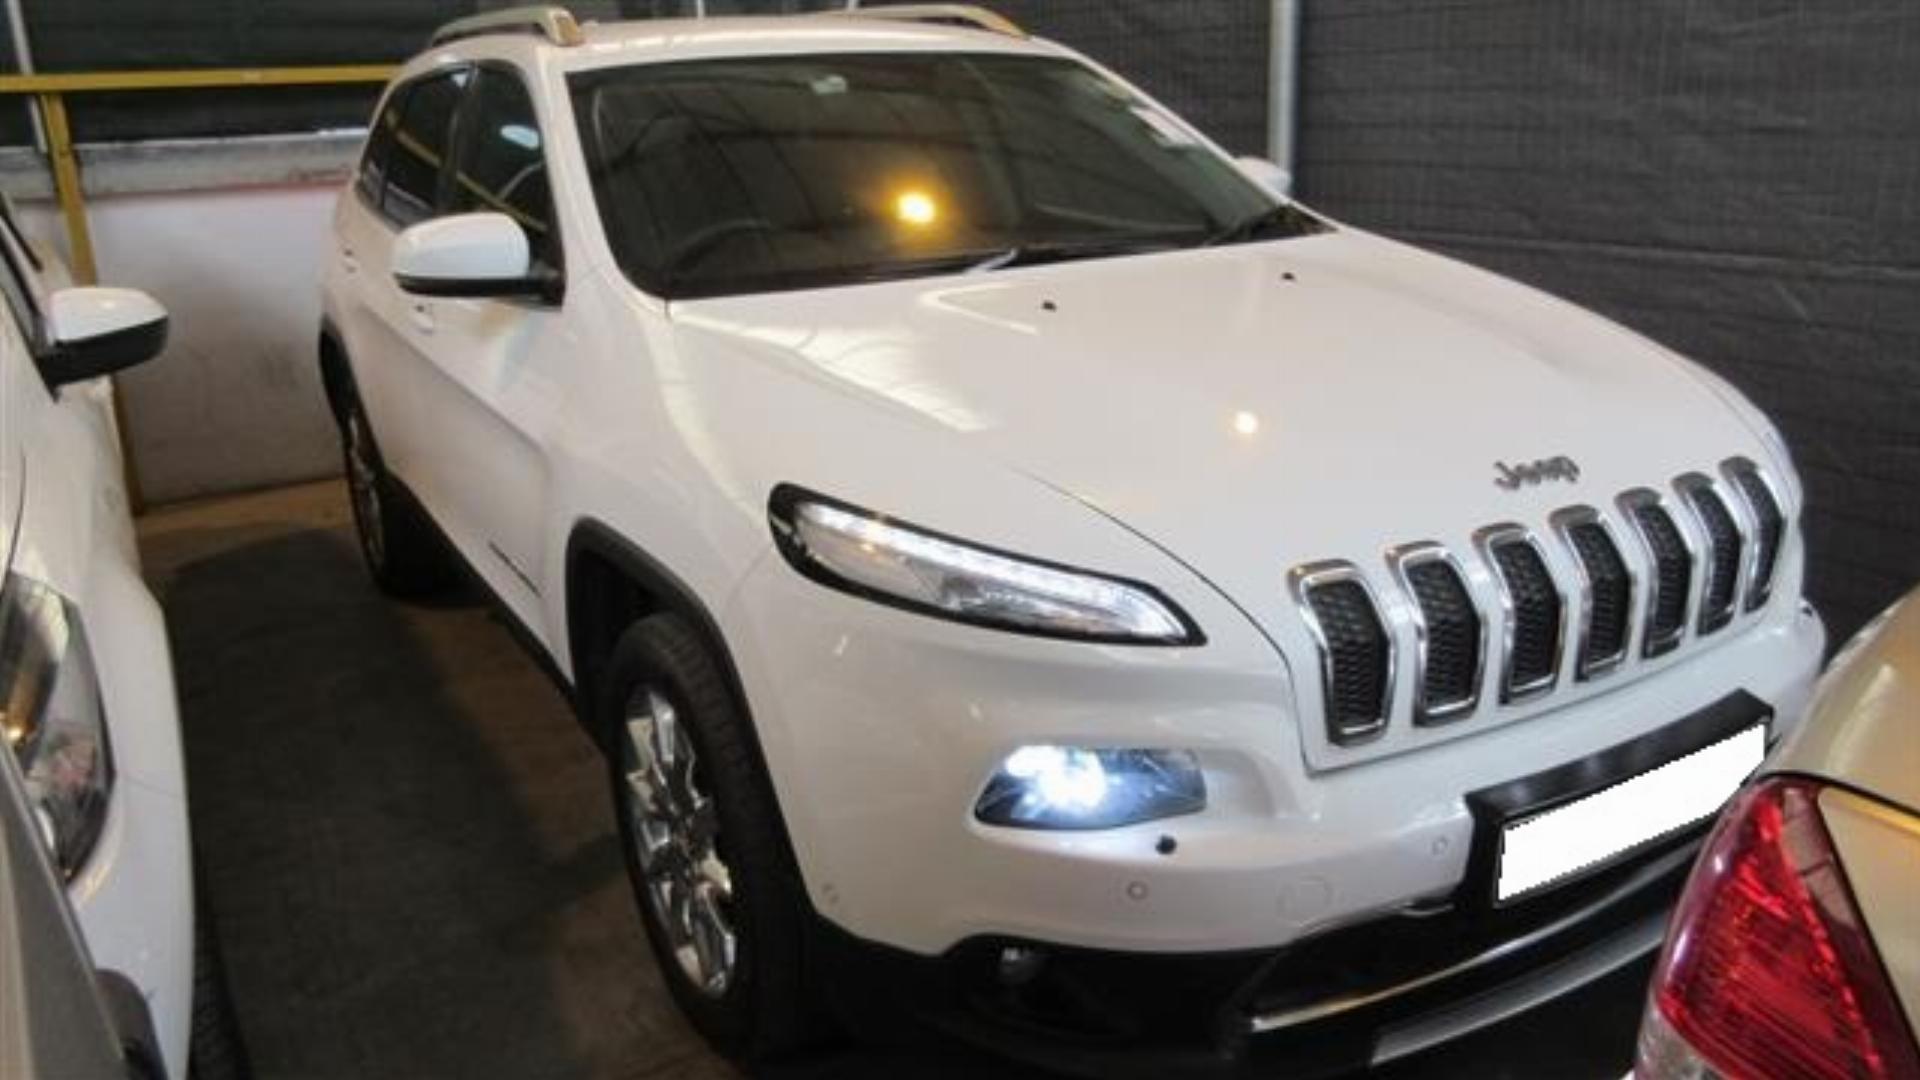 Repossessed Jeep Cherokee 3.2 LTD A/T Awd 2014 on auction